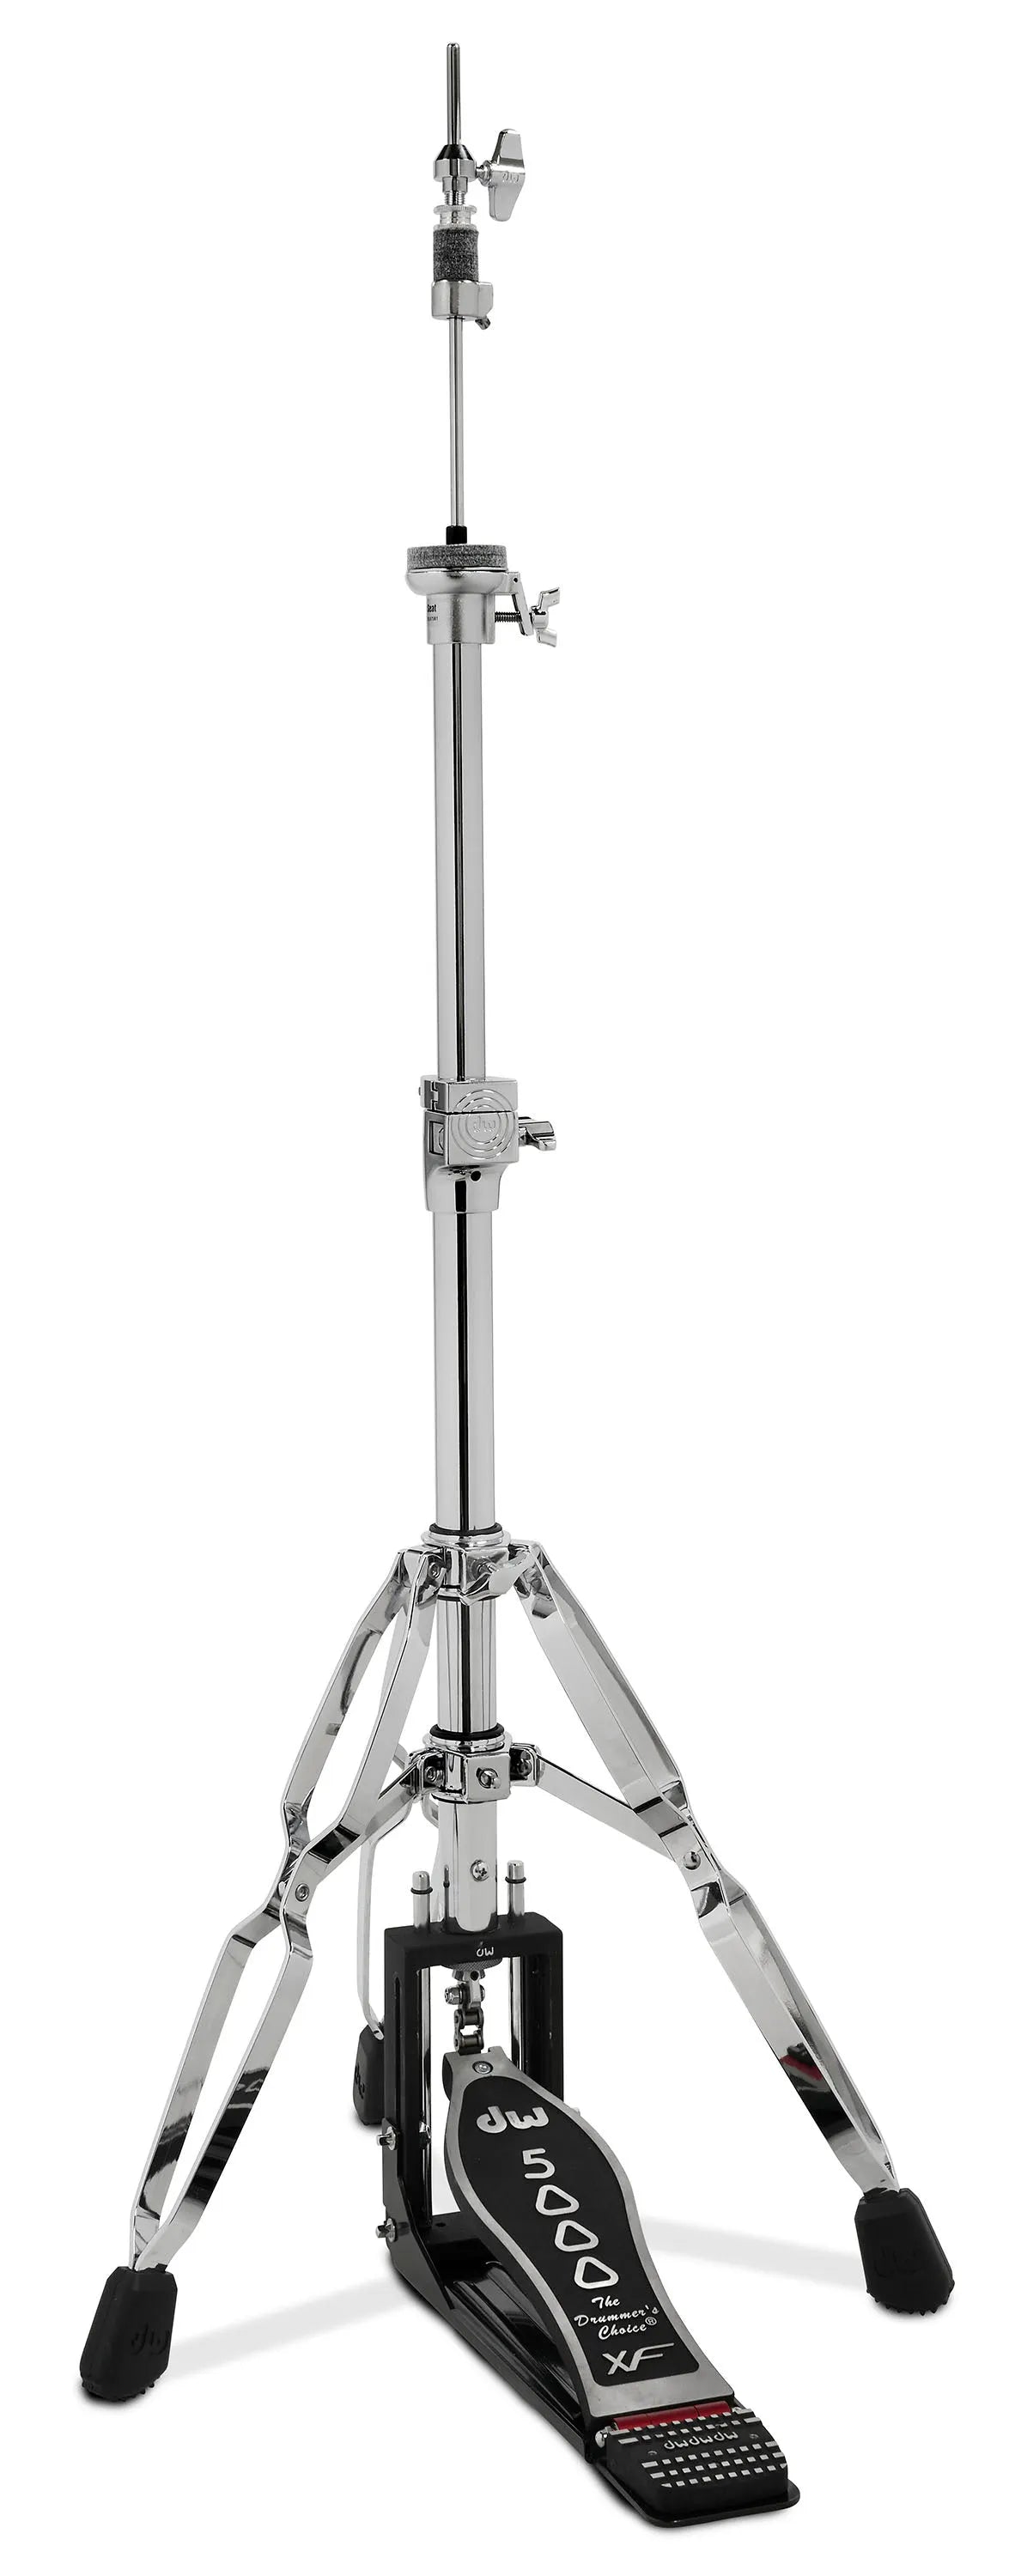 DW 5500 Series 3-Leg Hi-Hat Stand w/ Extended Footboard